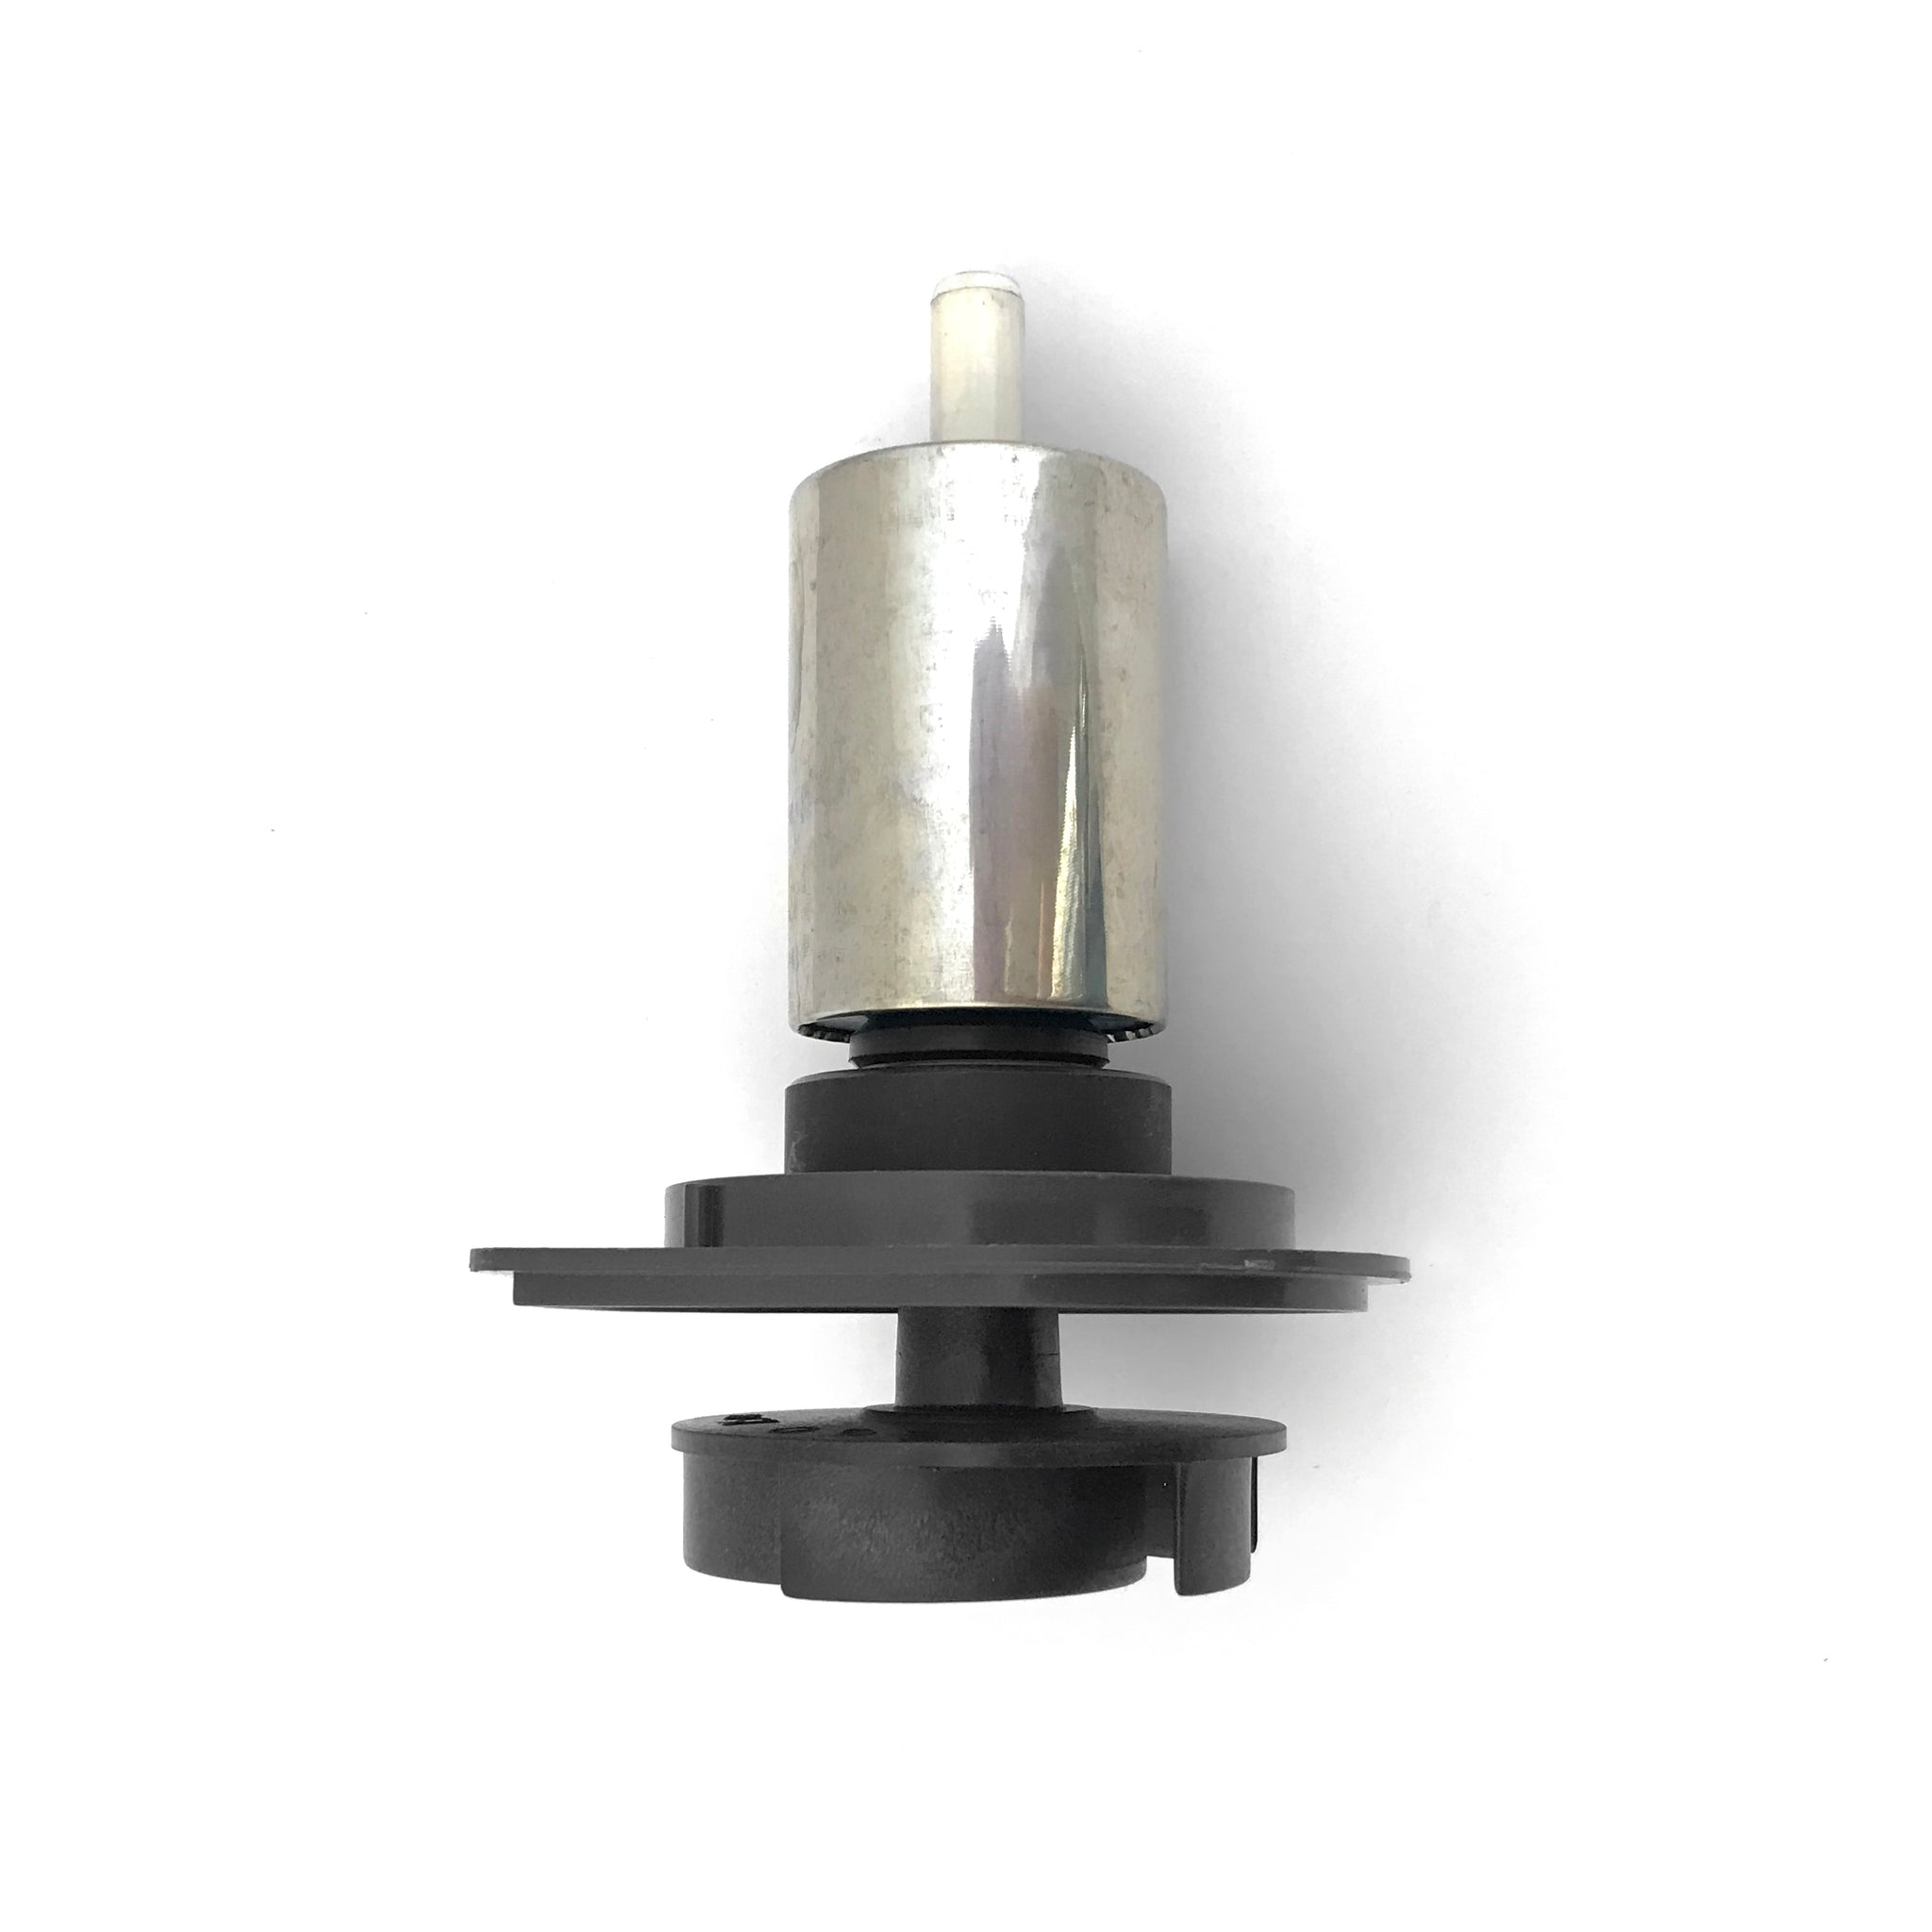 REPLACEMENT ROTOR FOR 5100 SKIMMER PUMP